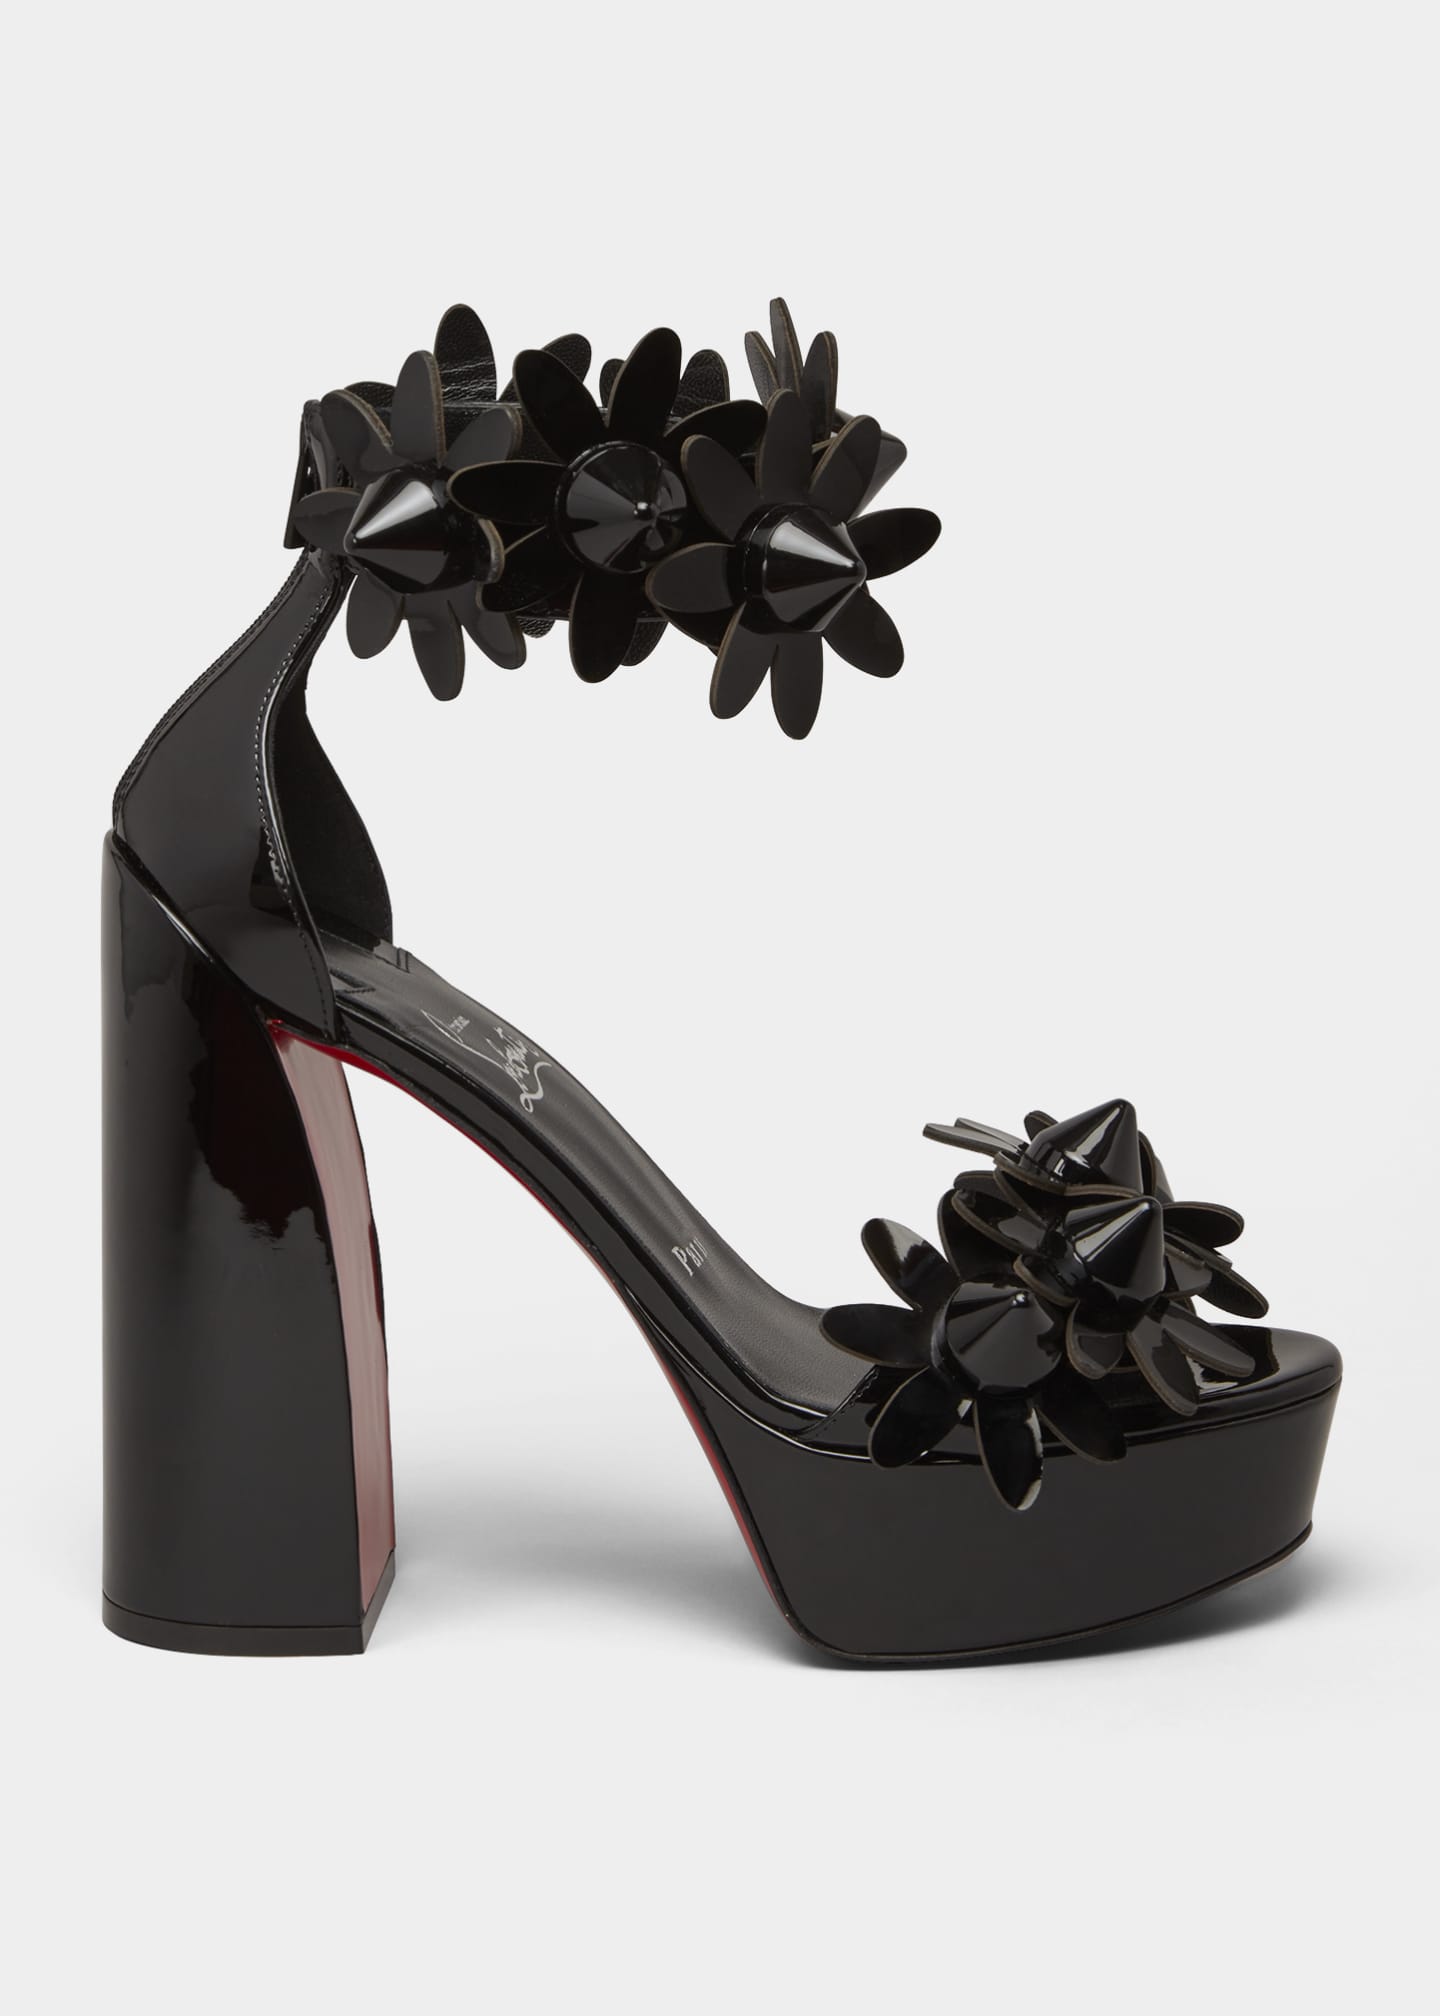 Christian Louboutin Daisy Spike Ankle-Cuff Red Sole Sandals - Bergdorf ...